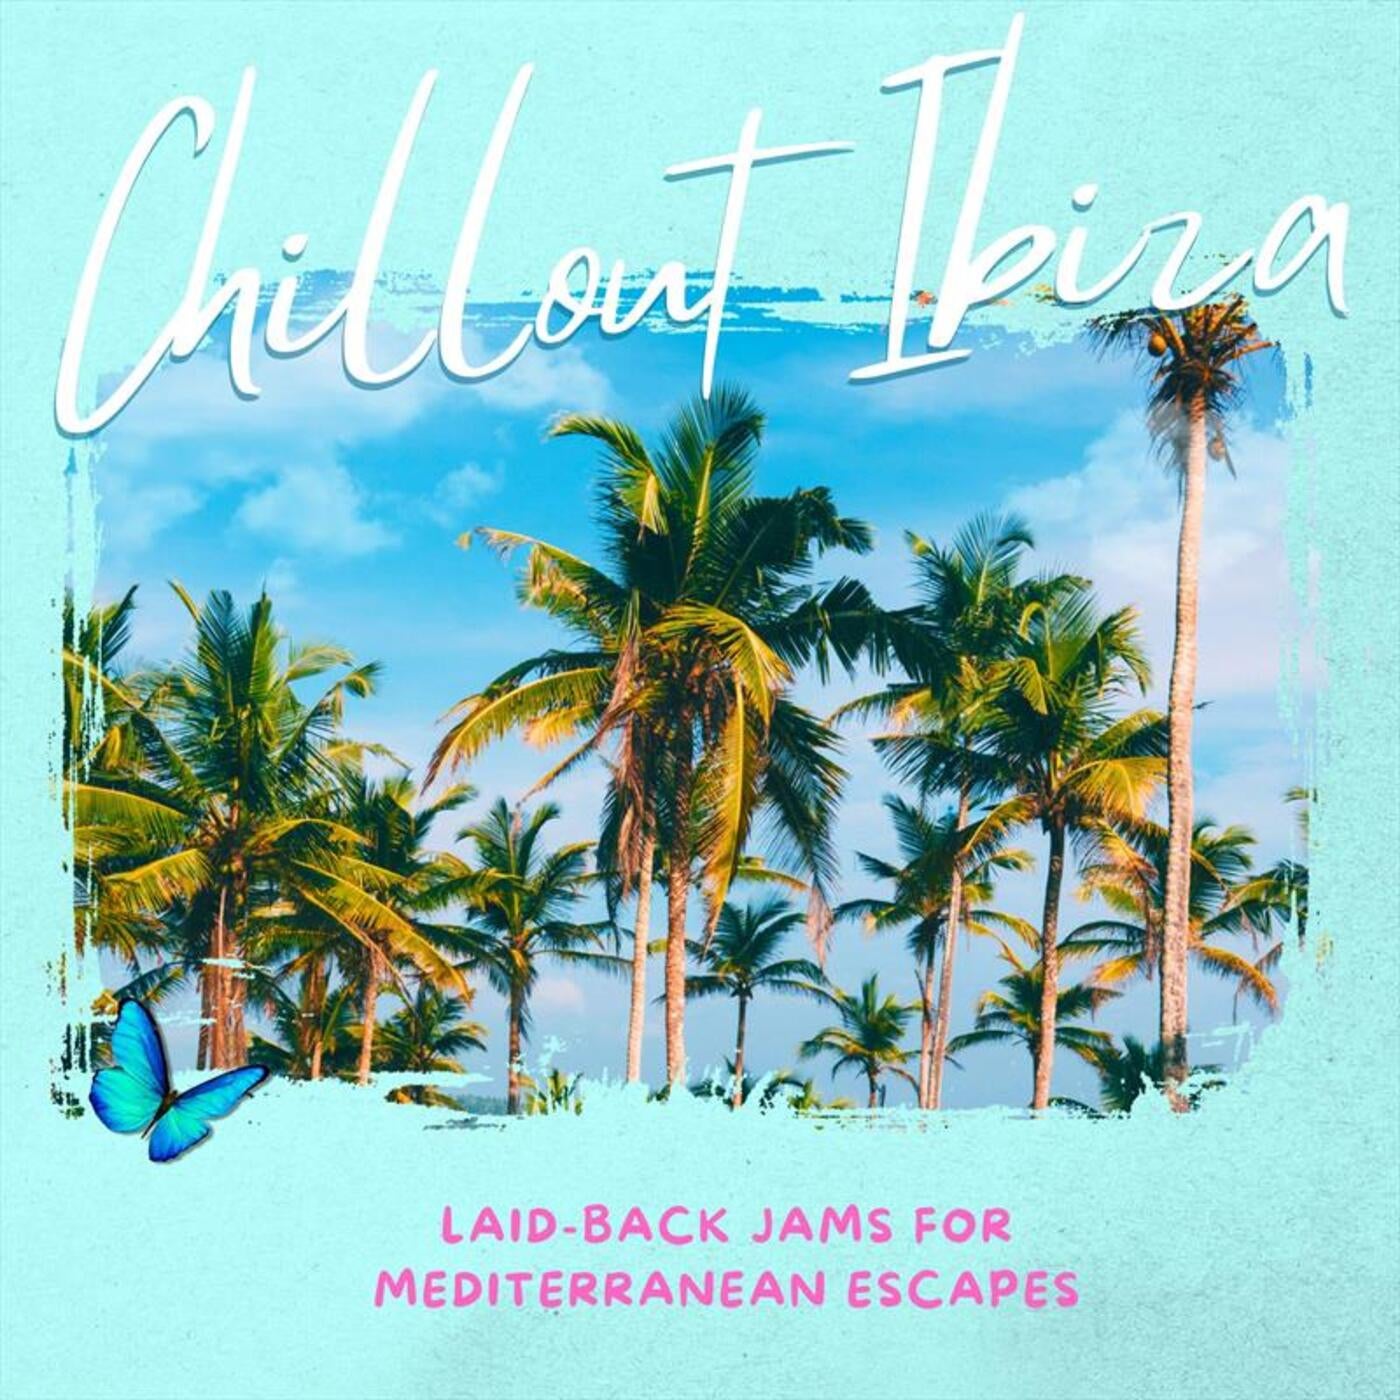 Chillout Ibiza: Laid-Back Jams for Mediterranean Escapes